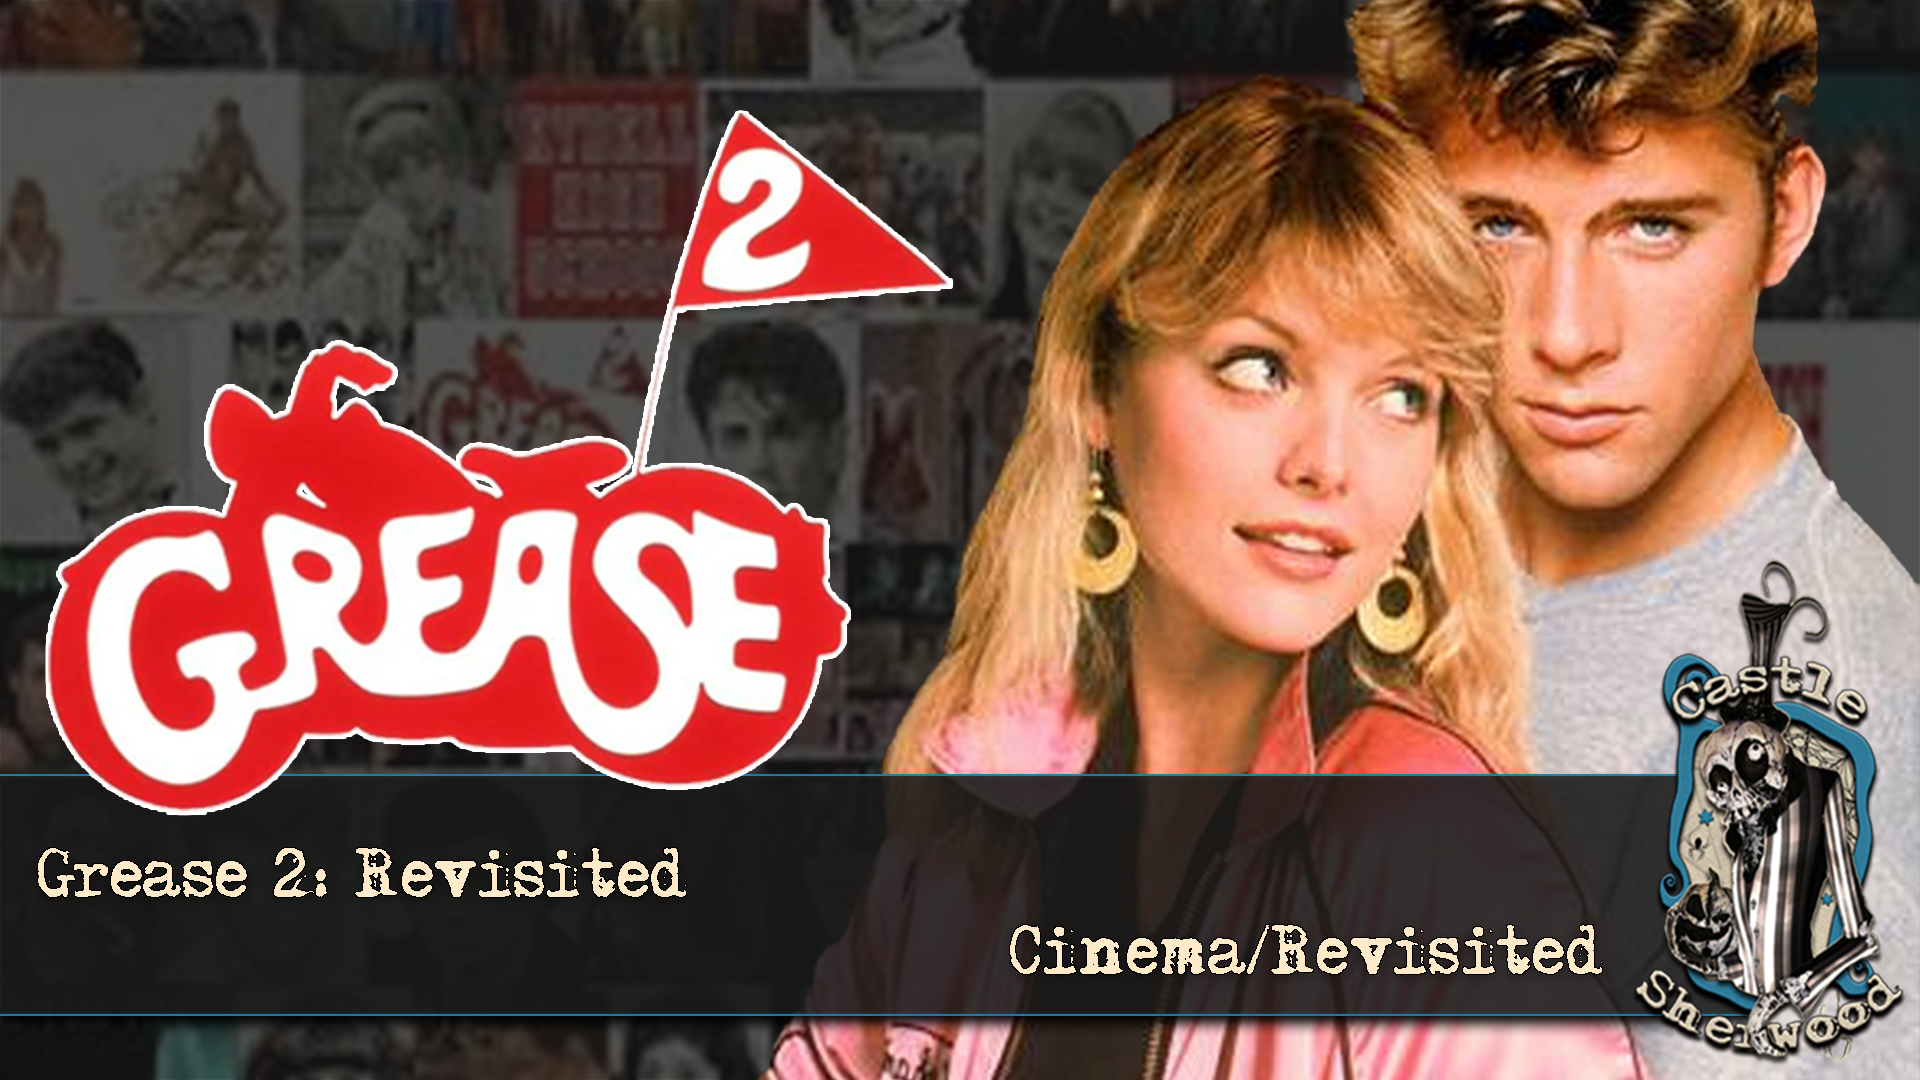 Grease 2: Revisited